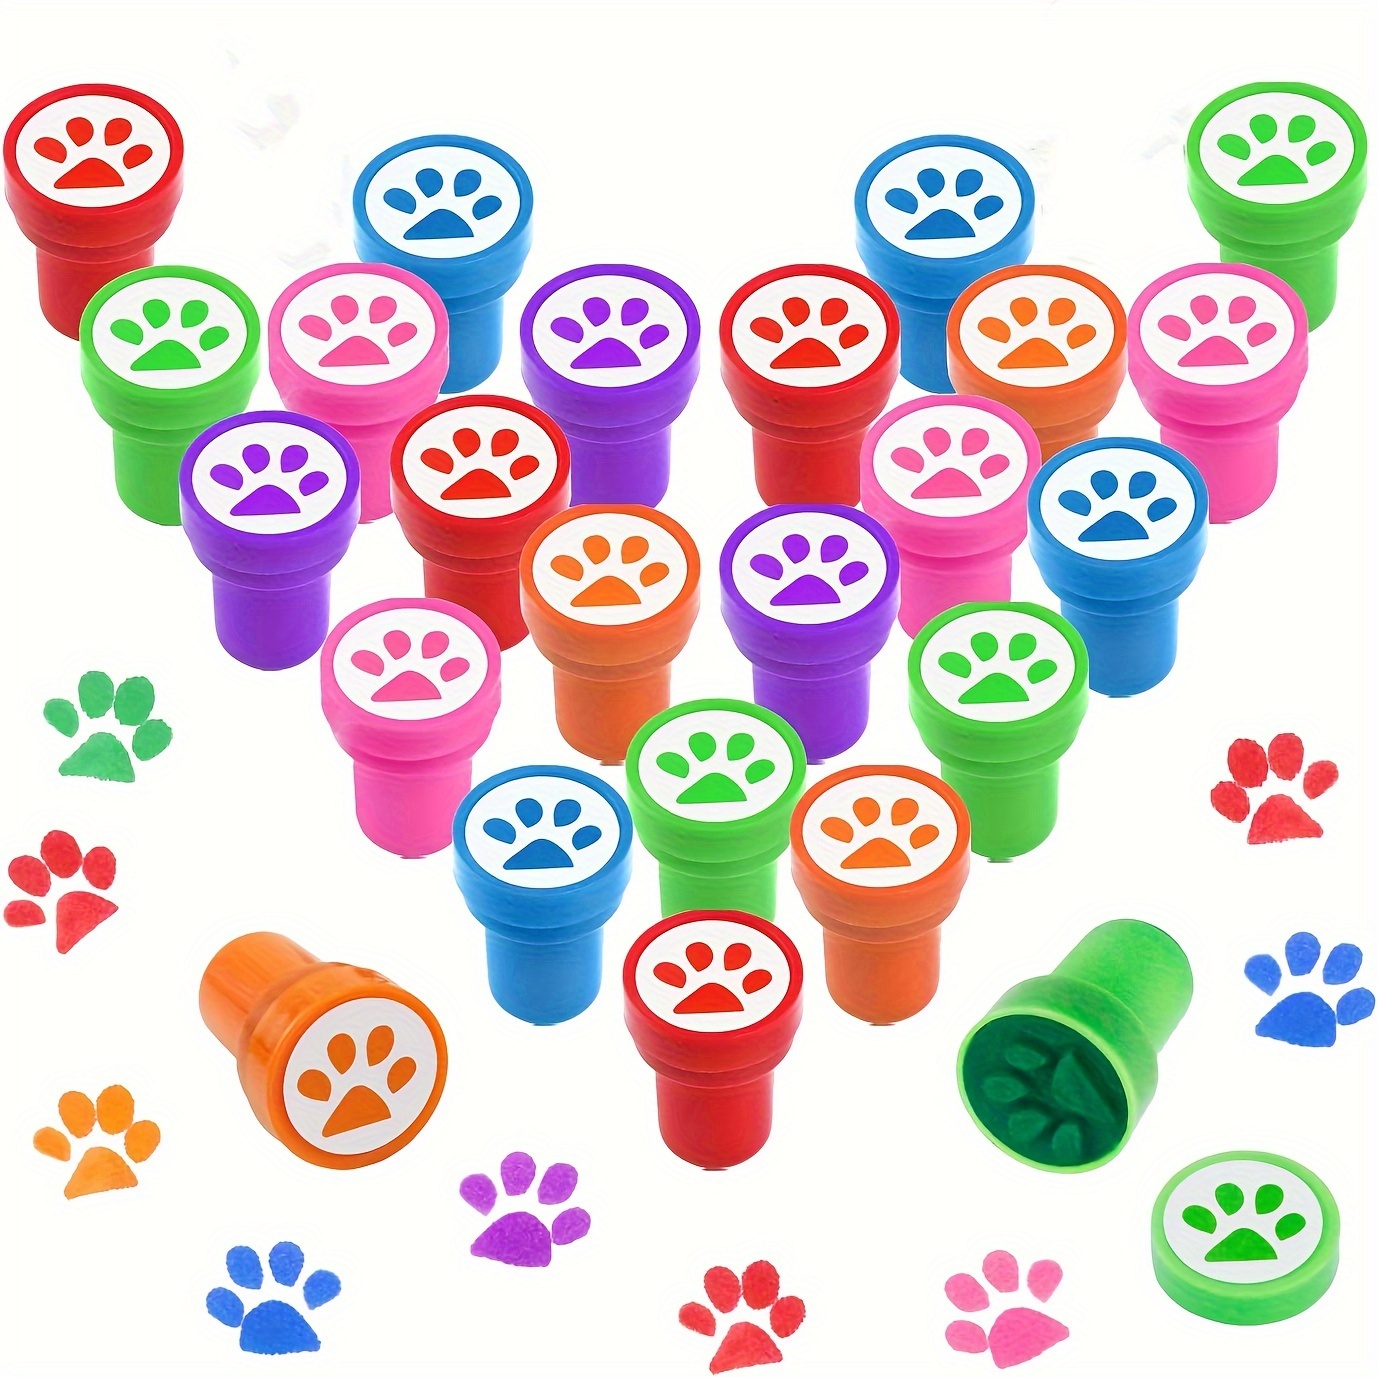 

30-pack Paw Print Stampers For Kids, Non-toxic Plastic Party Favors, Educational Toys For Ages 3-6, Stampers For Arts, Crafts, Rewards, And Birthday Party Gifts - Assorted Colors